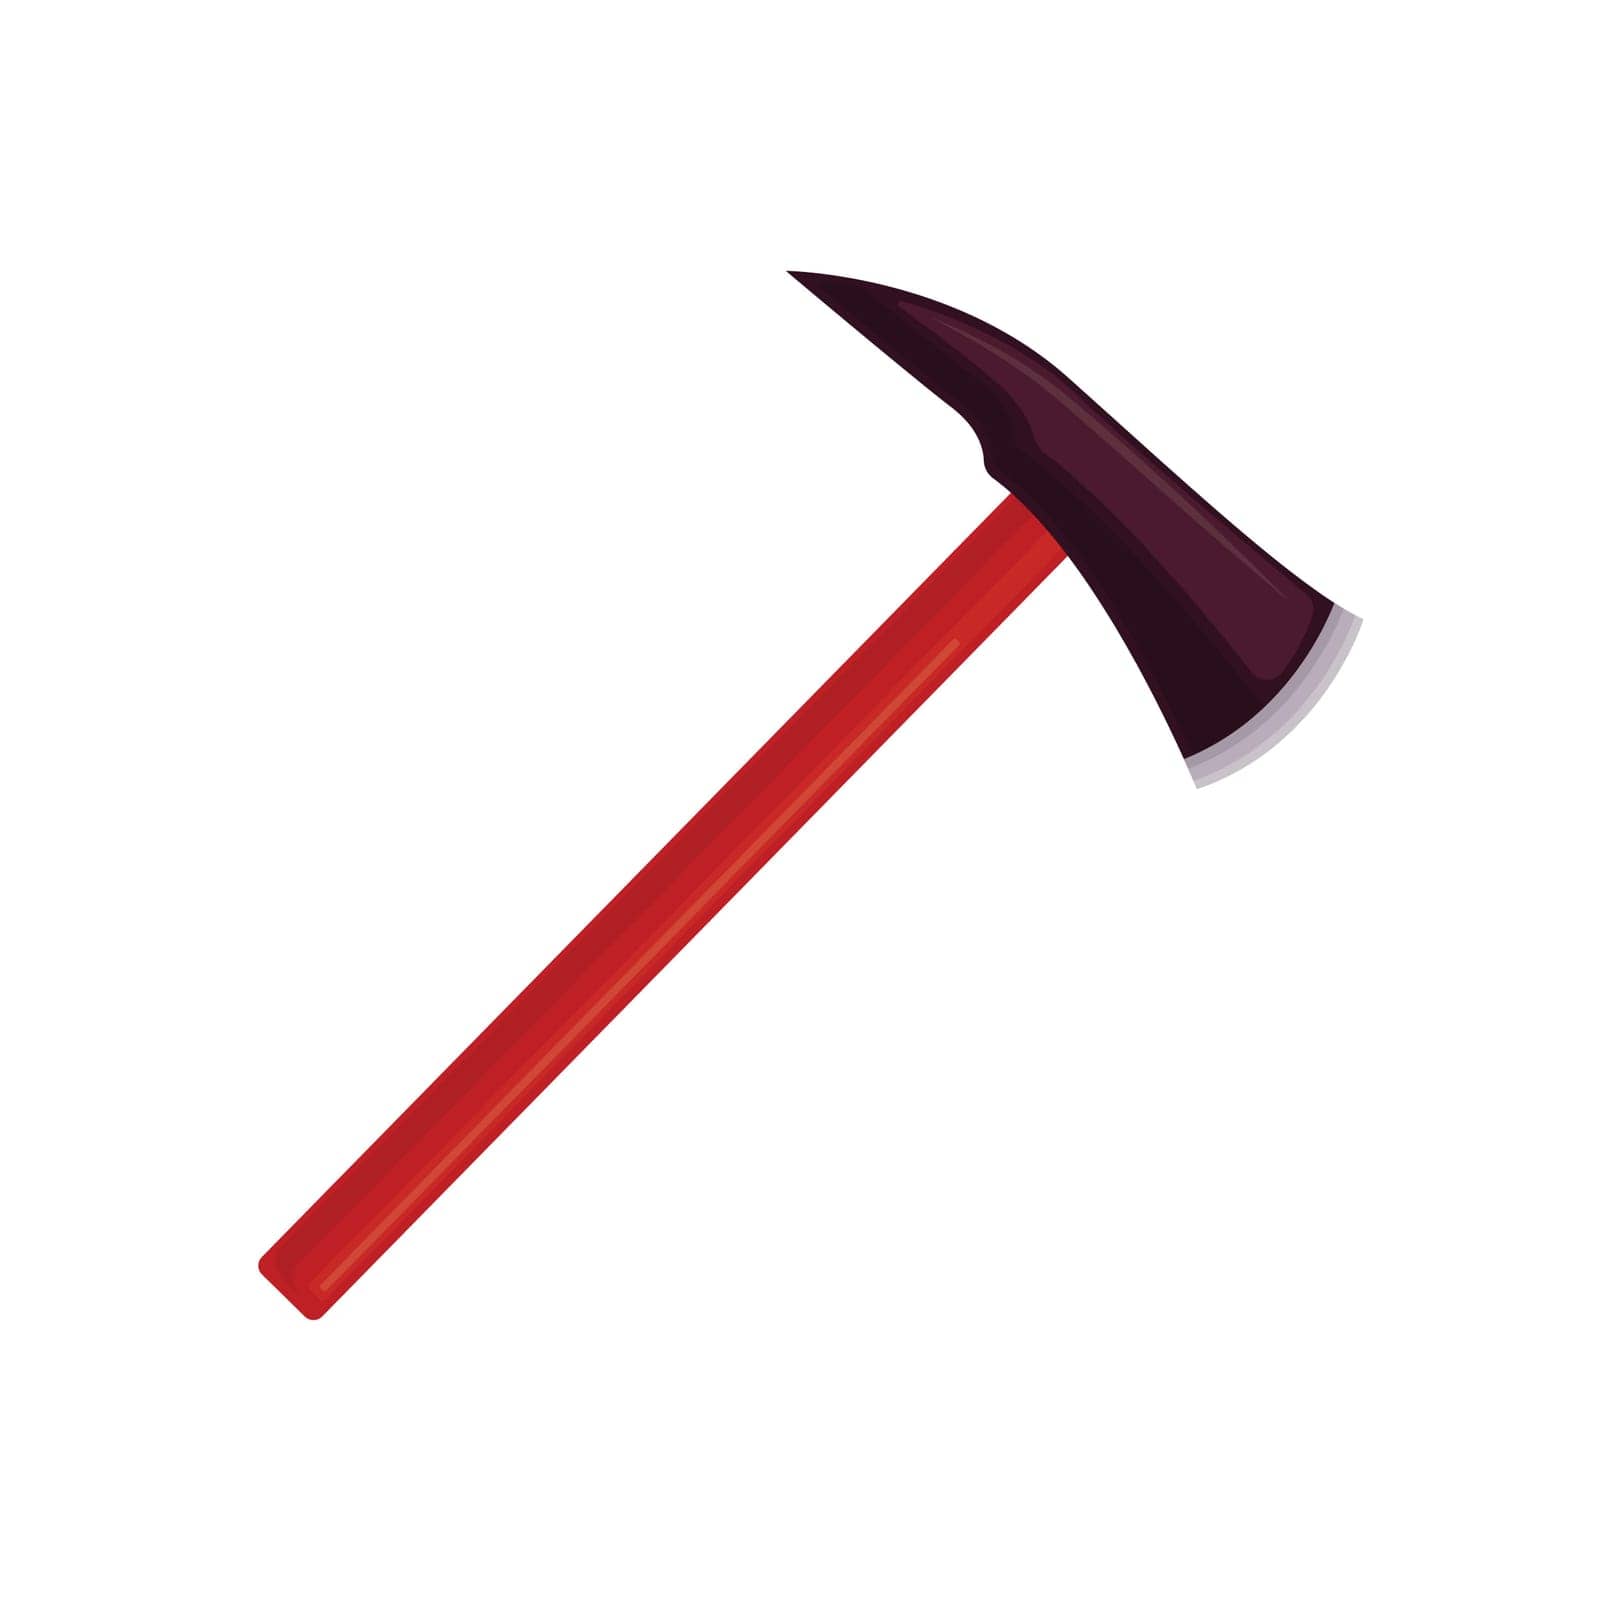 A fire axe. A tool for disassembling wooden structures. A device for saving people in case of fire. A firefighter s working tool. Vector illustration isolated on a white background.